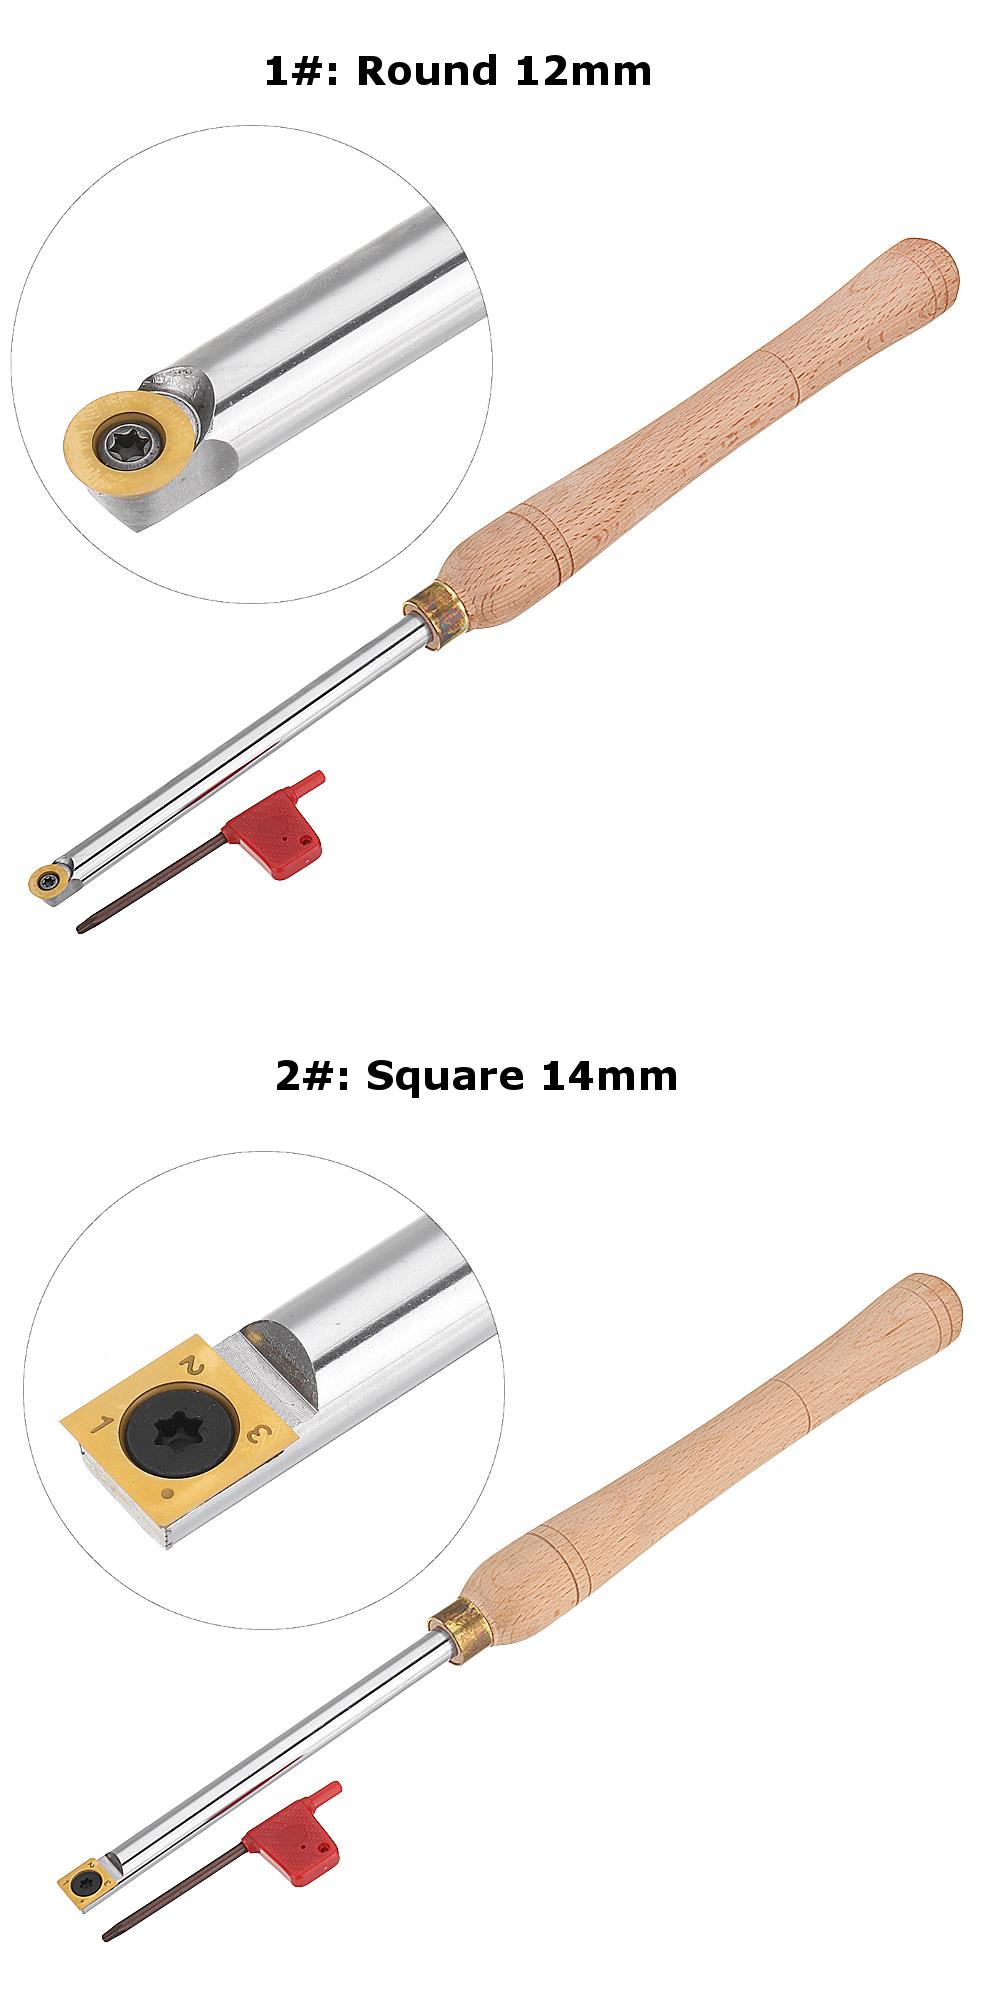 Drillpro-Wood-Turning-Tool-Wood-Handle-with-Titanium-Coated-Wood-Carbide-Insert-Cutter-Round-Shank-W-1456447-6